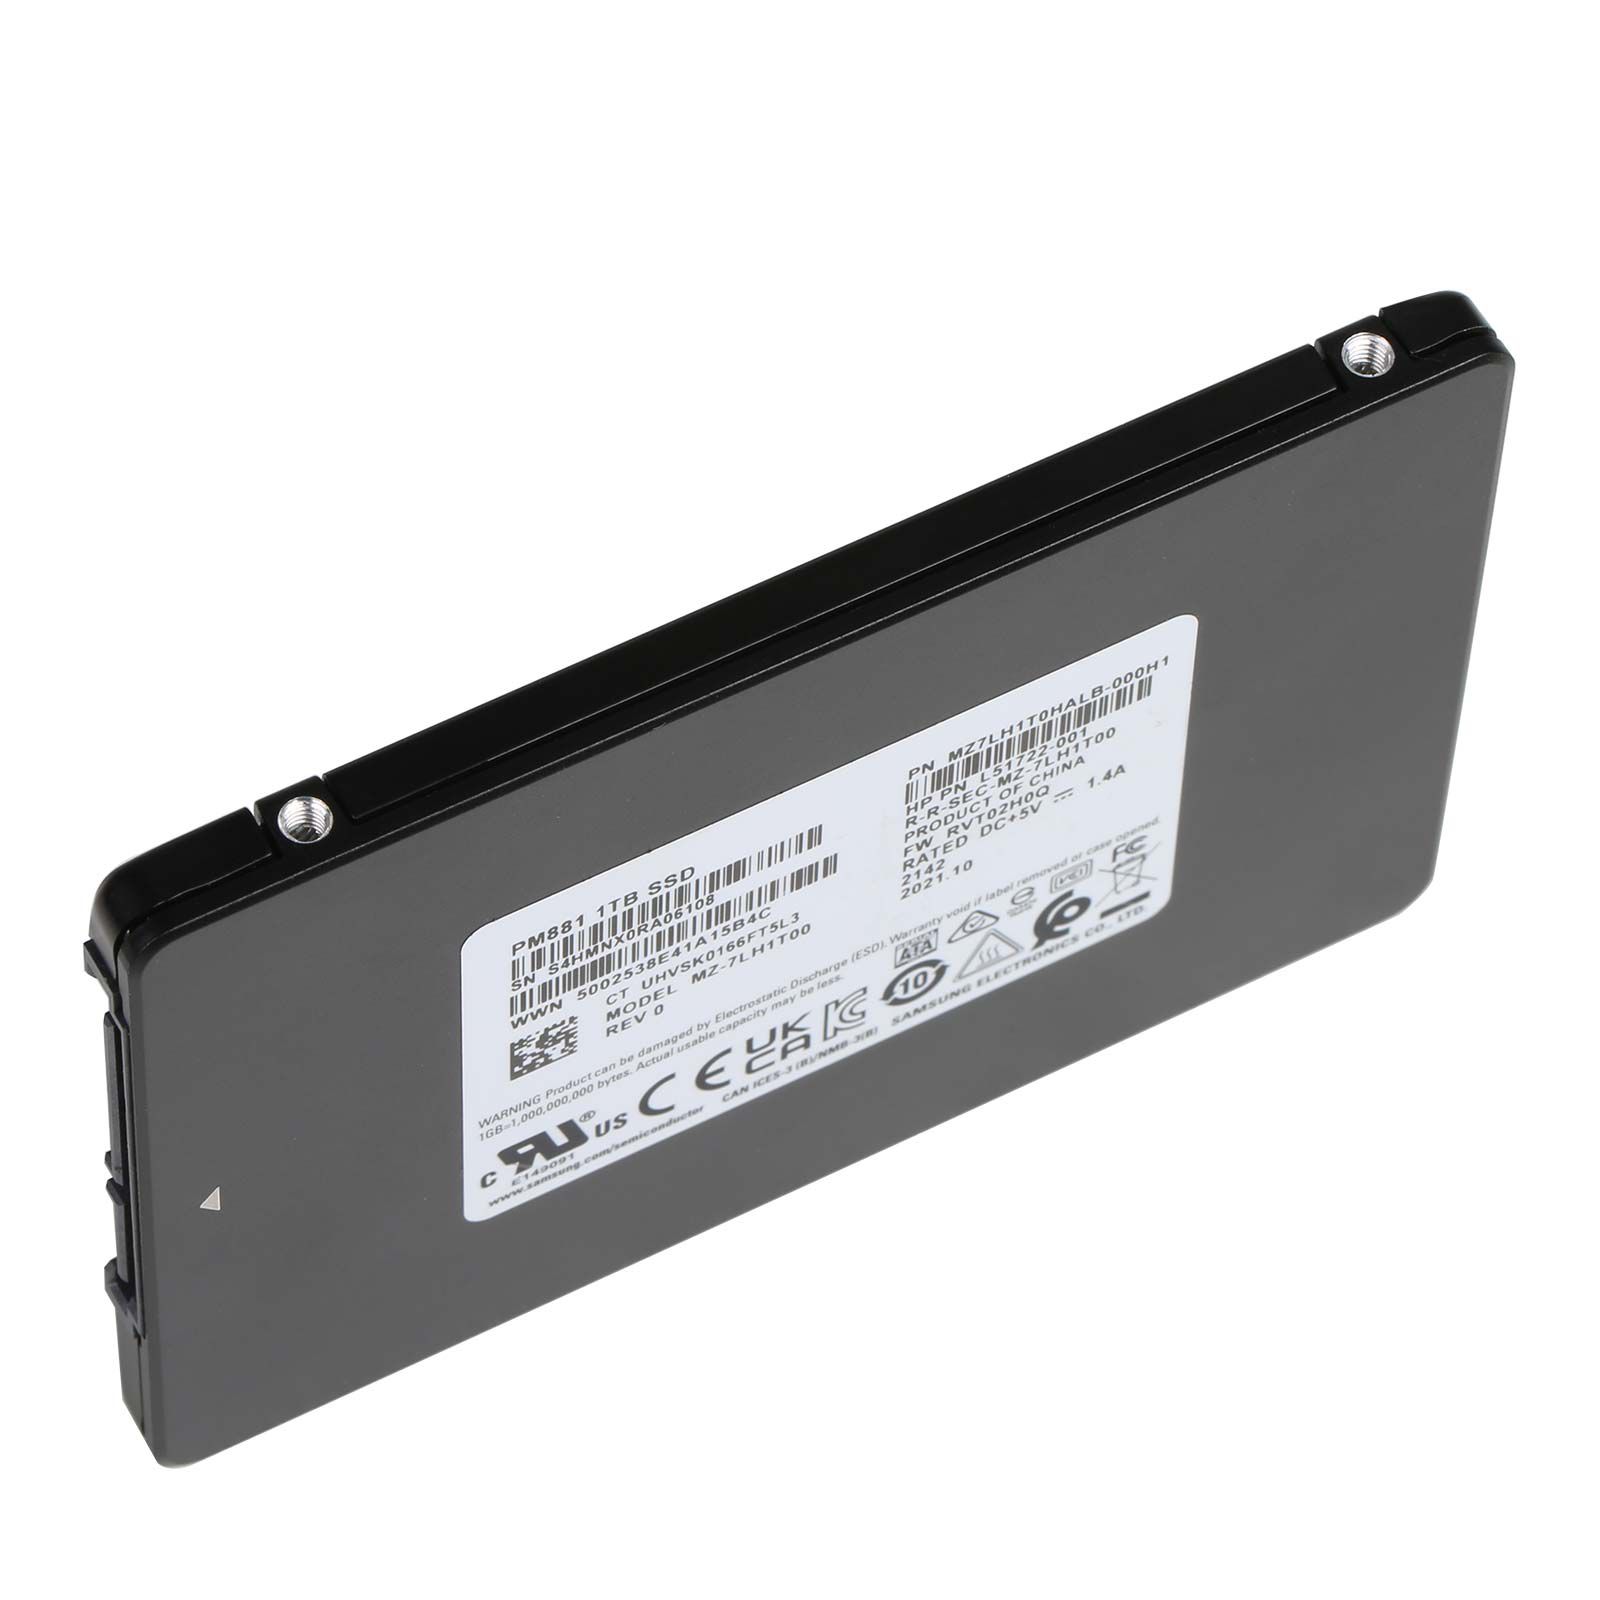 V2023.6 BMW ICOM Software 1TB SSD ISTA-D 4.41.30 ISTA-P 70.0.200 with Engineers Programming with Win10 System